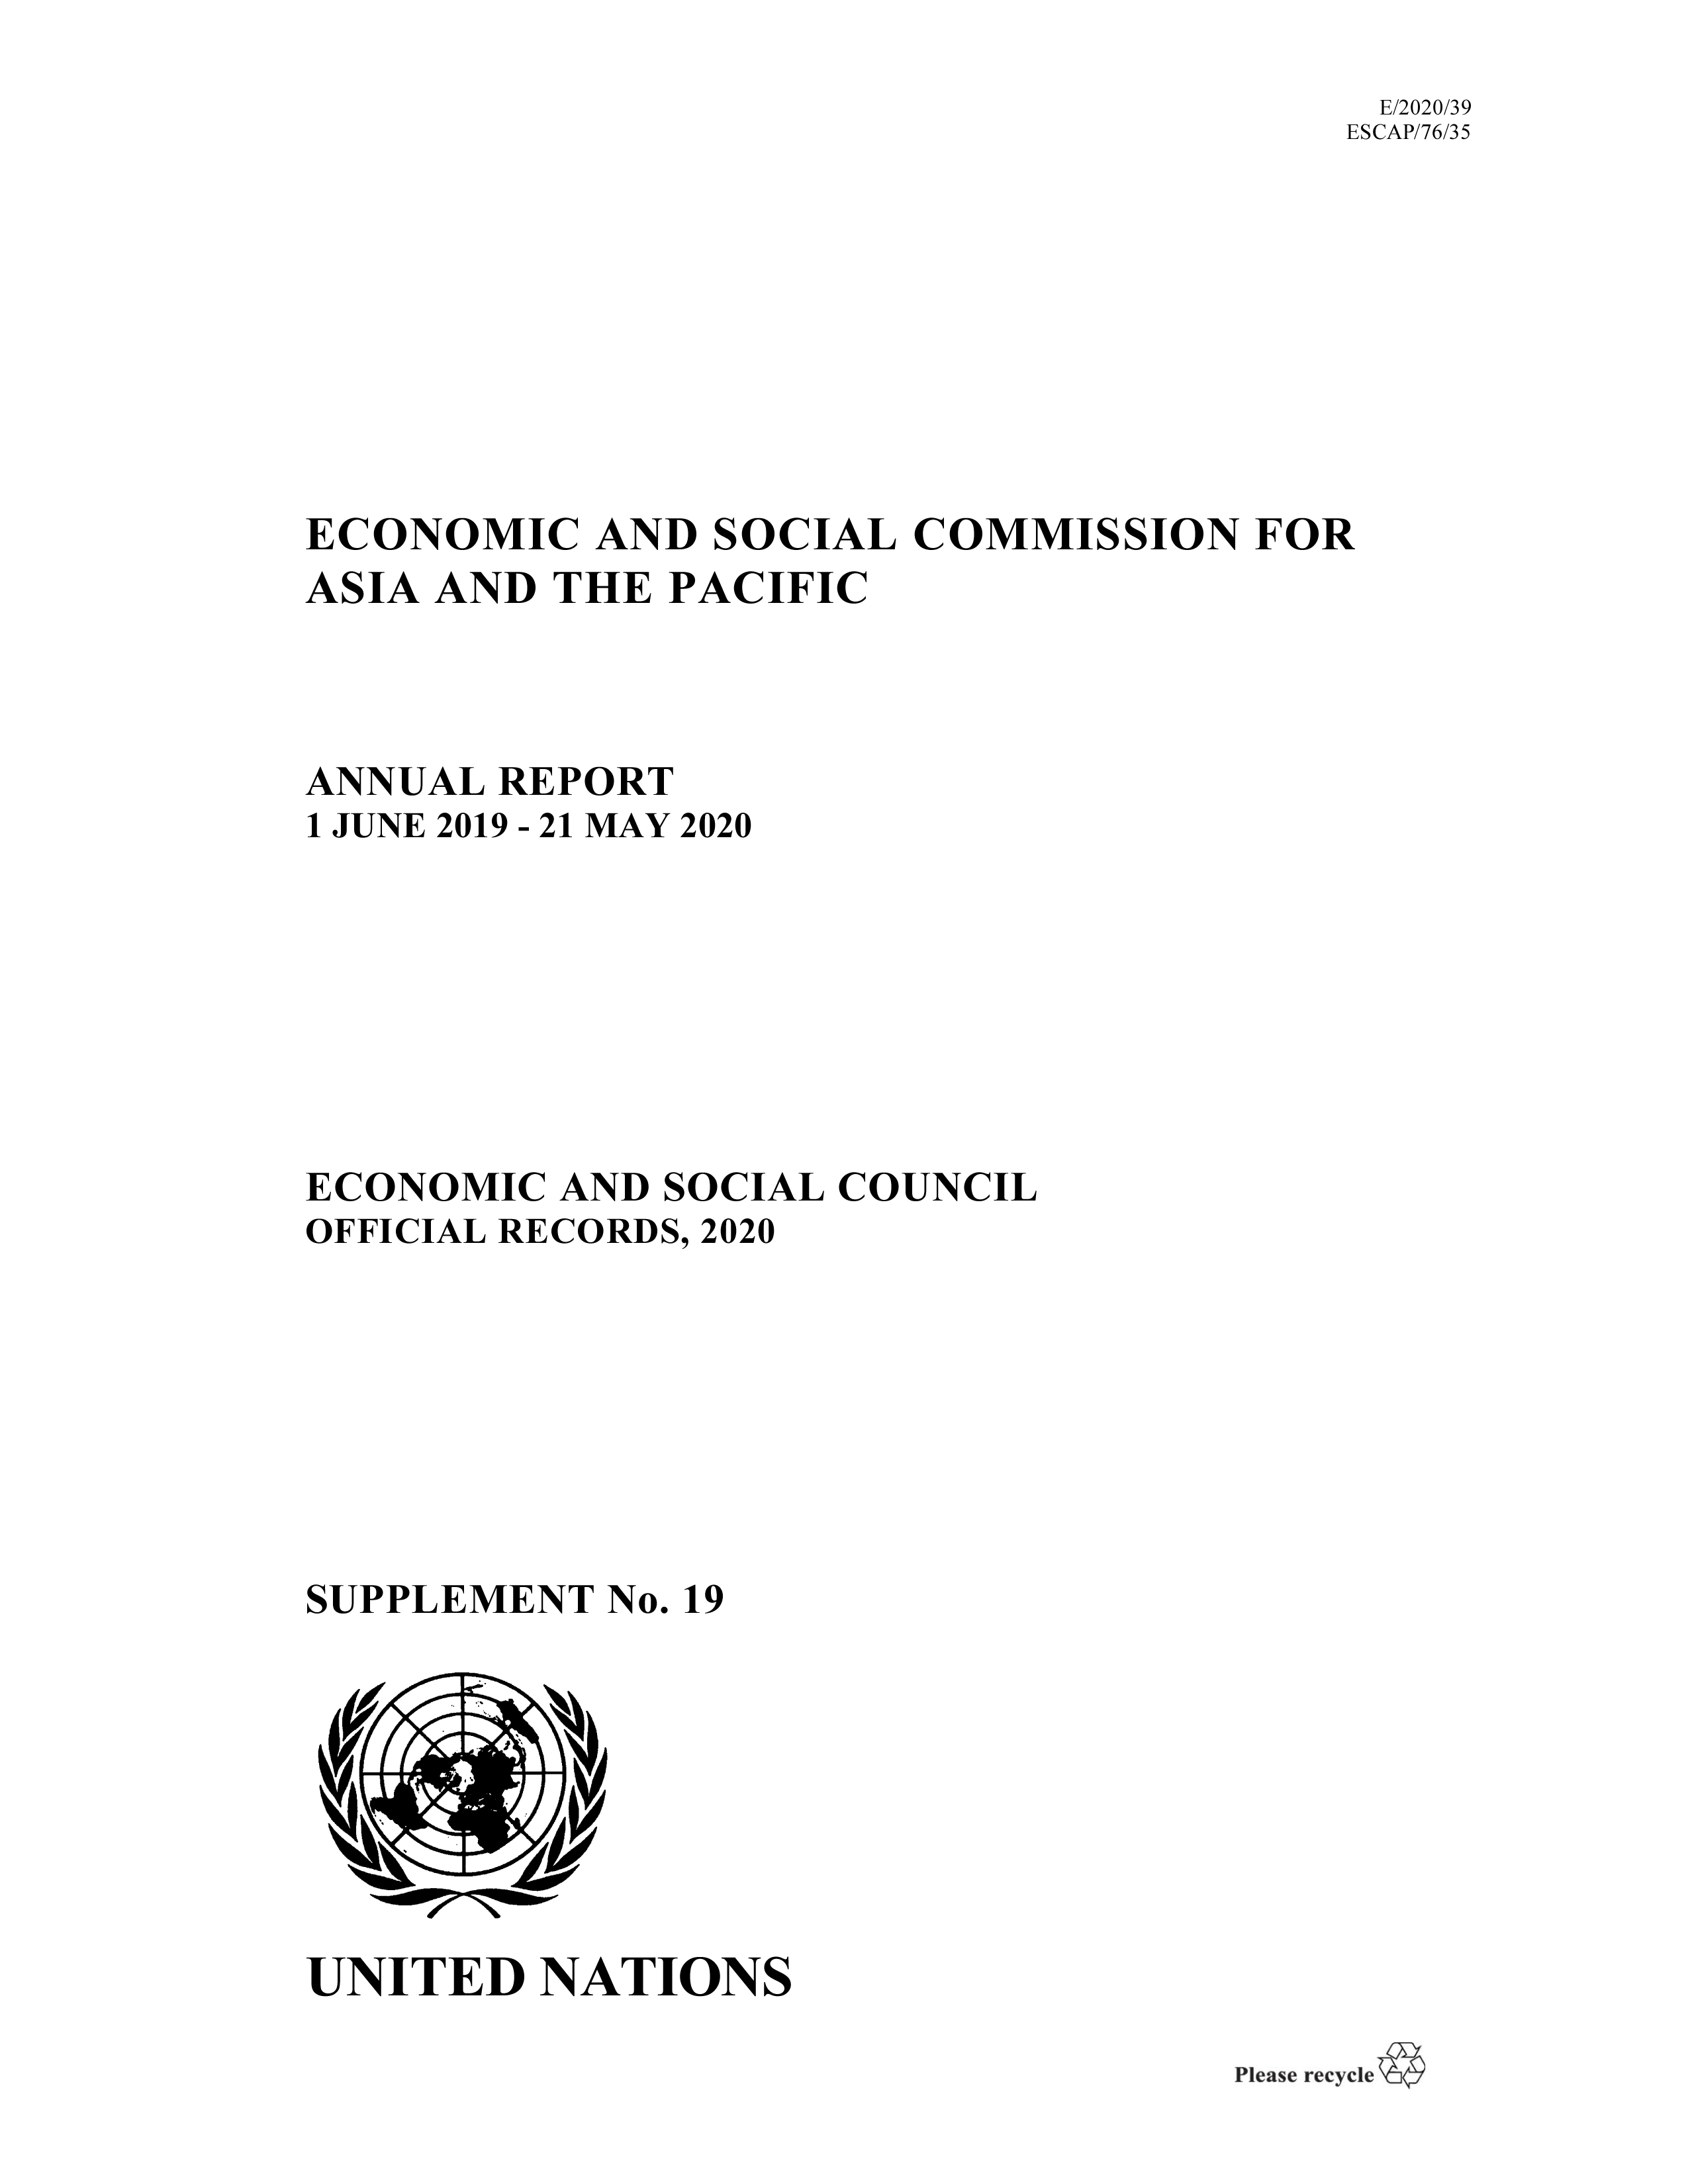 image of Annual Report of the Economic and Social Commission for Asia and the Pacific 2020